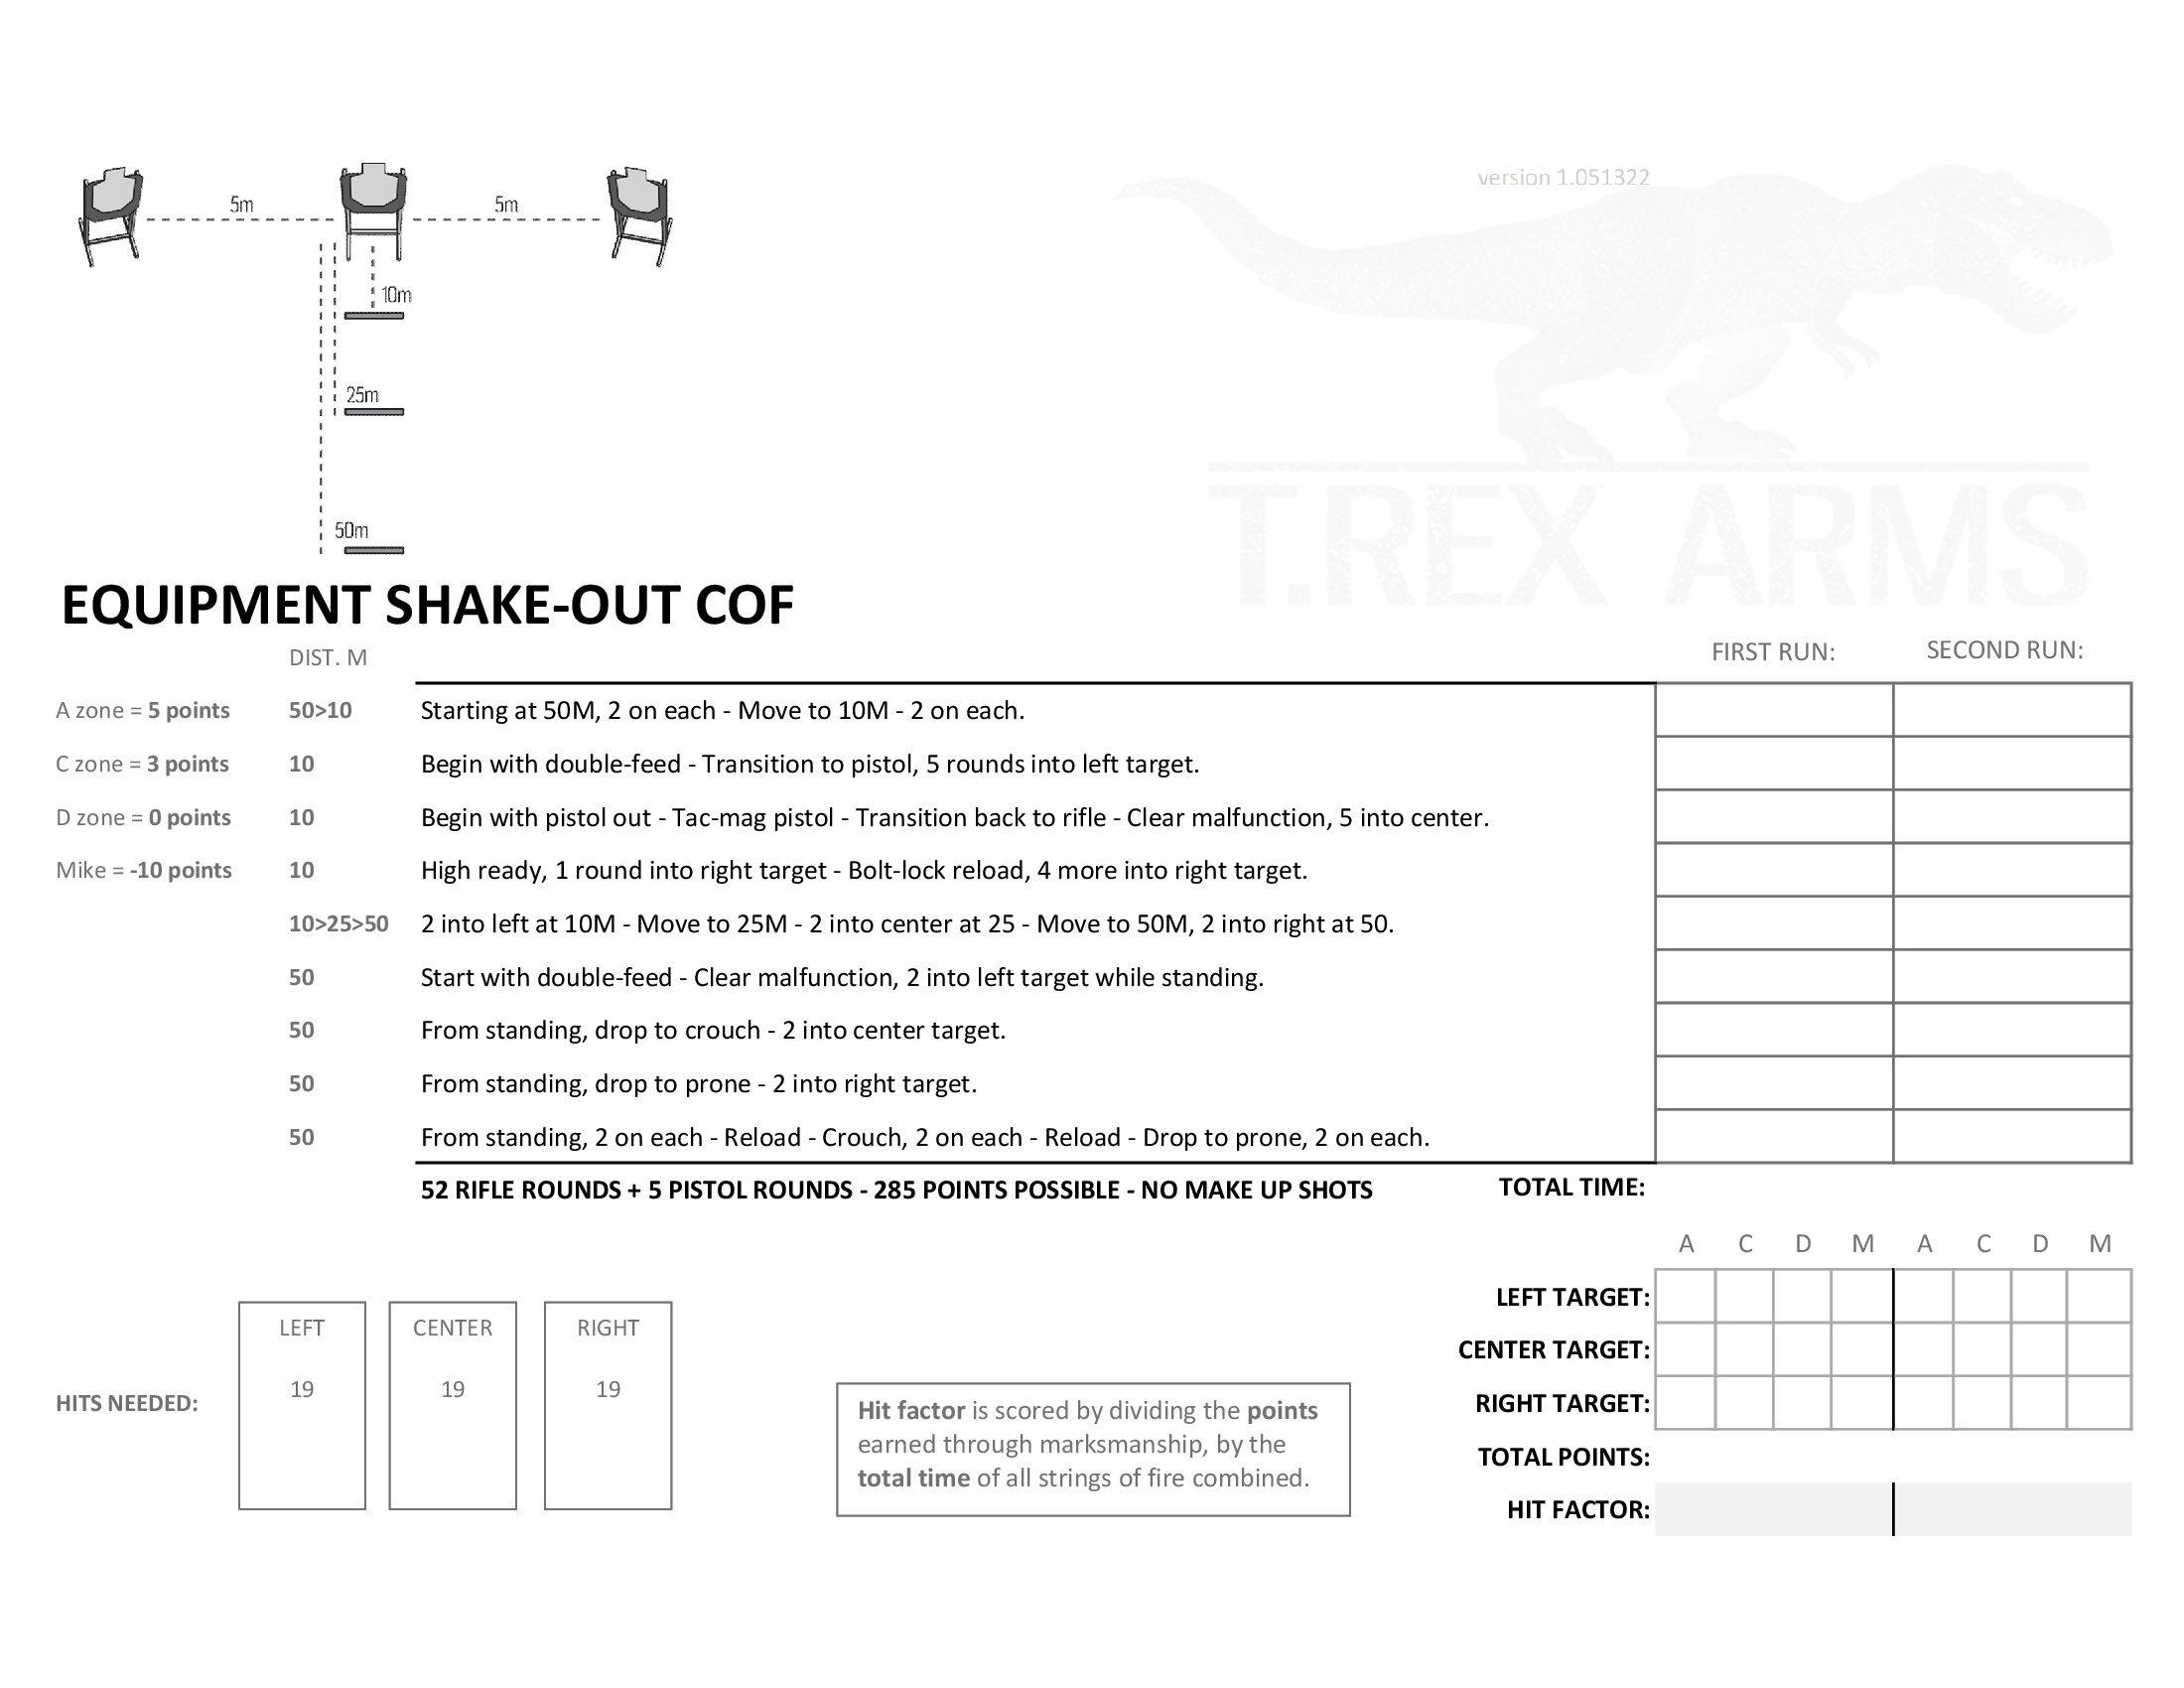 Equipment Shake-out COF print-out